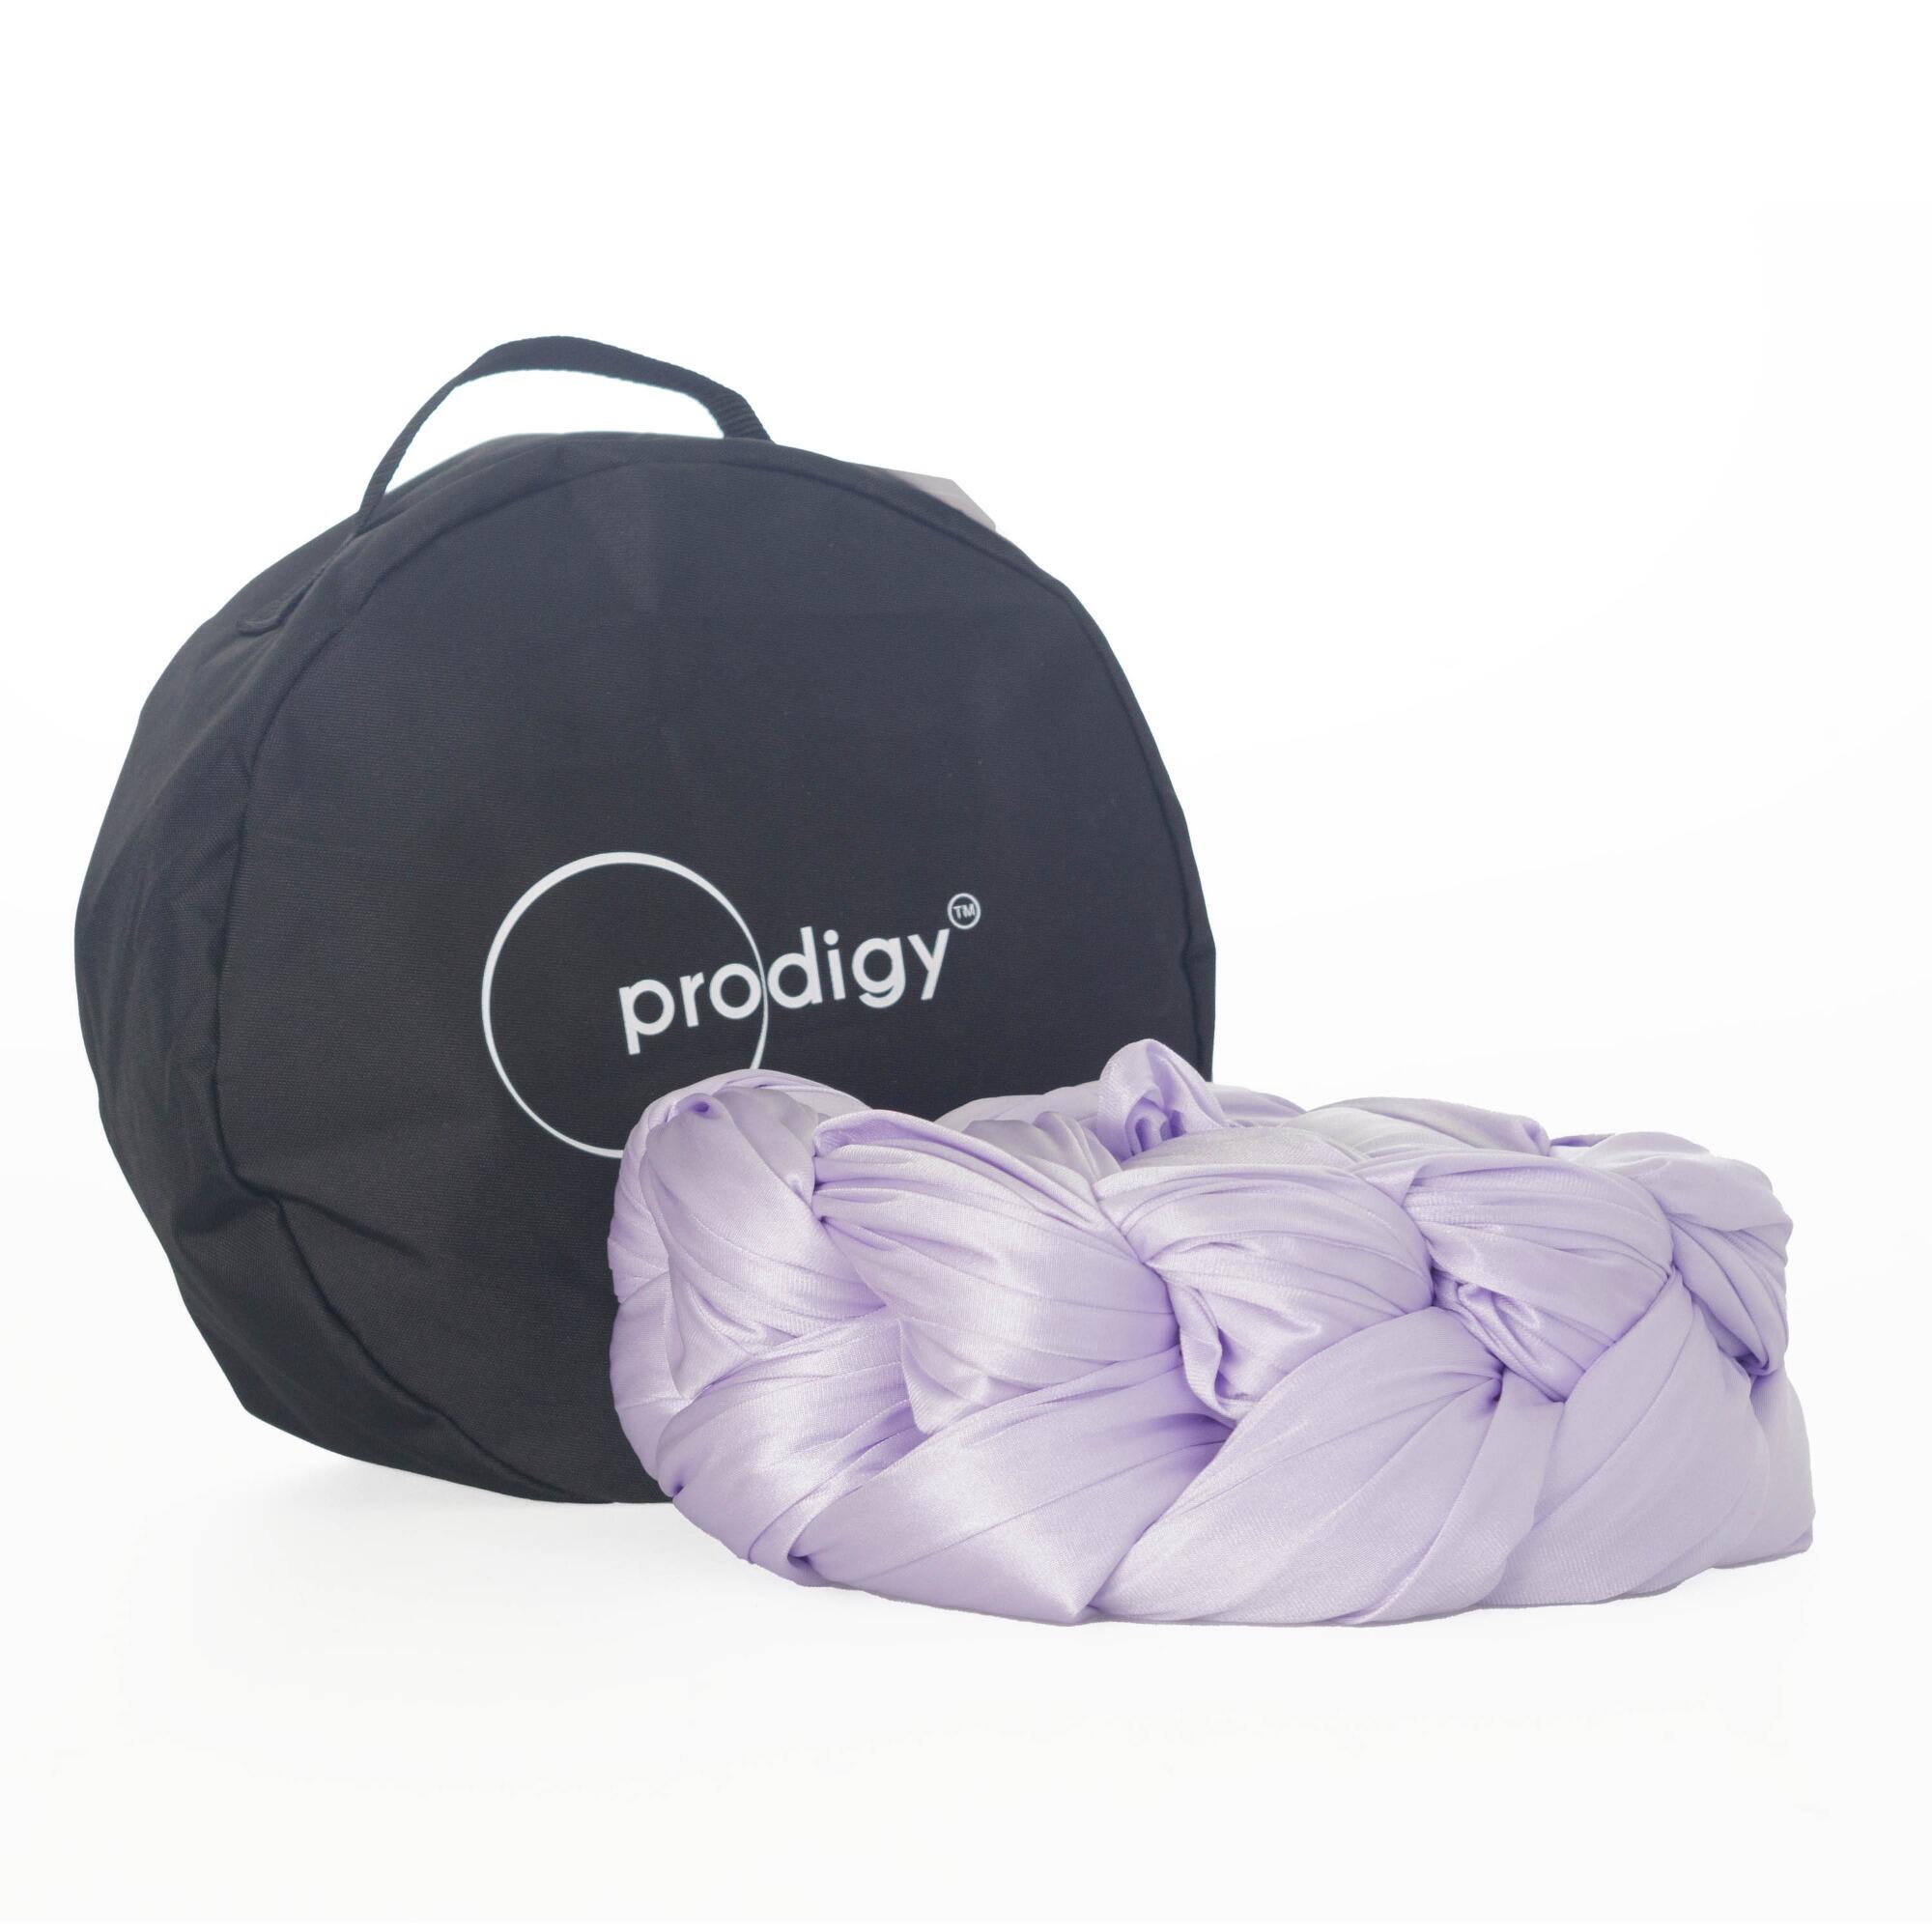 6m Prodigy Aerial Fabric for Hammocks -Lilac with round Prodigy bag 1/5